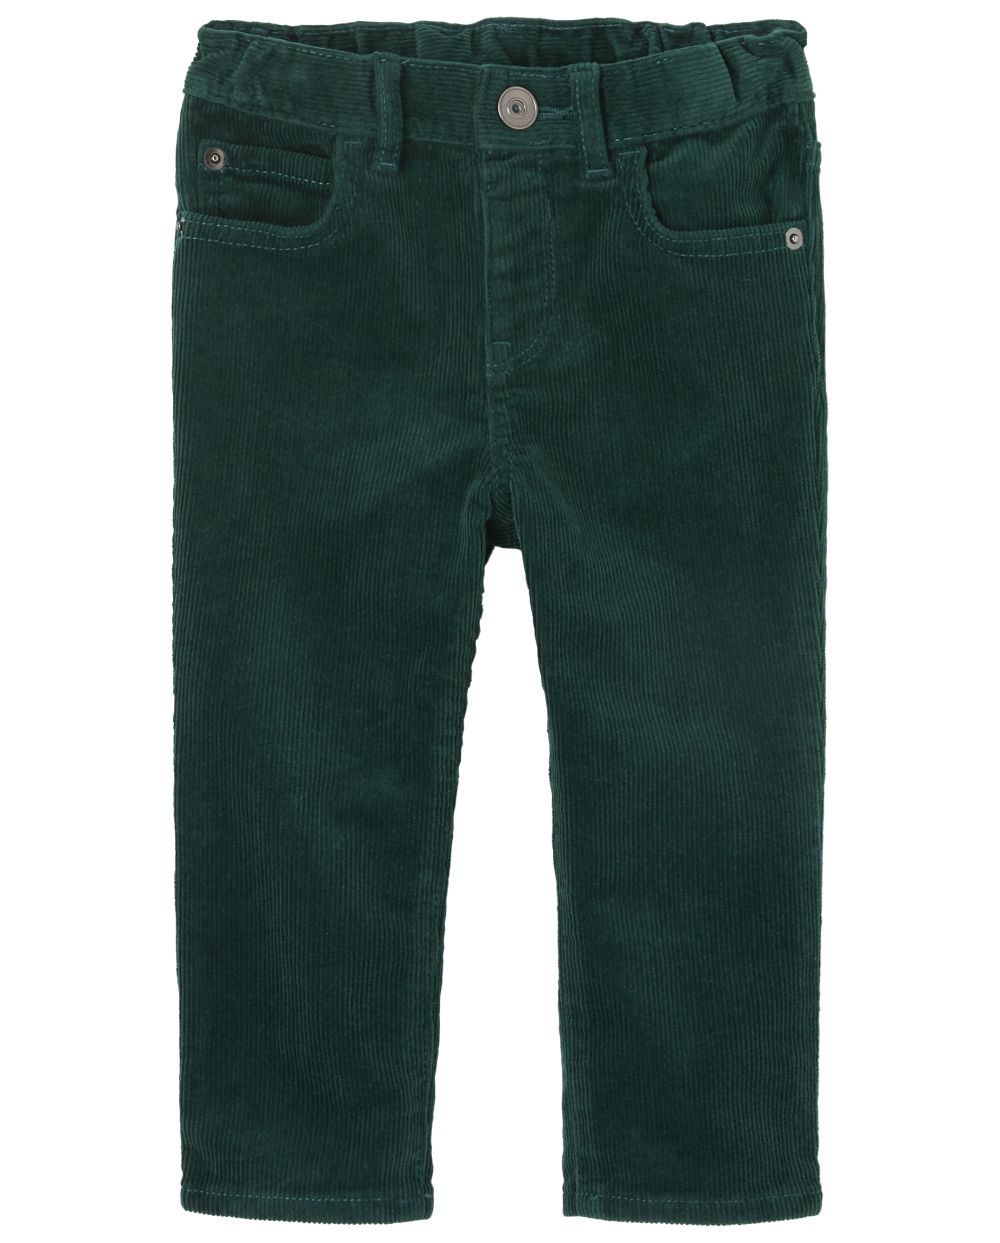 

s Toddler Boys Stretch Corduroy Pants - Green - The Children's Place